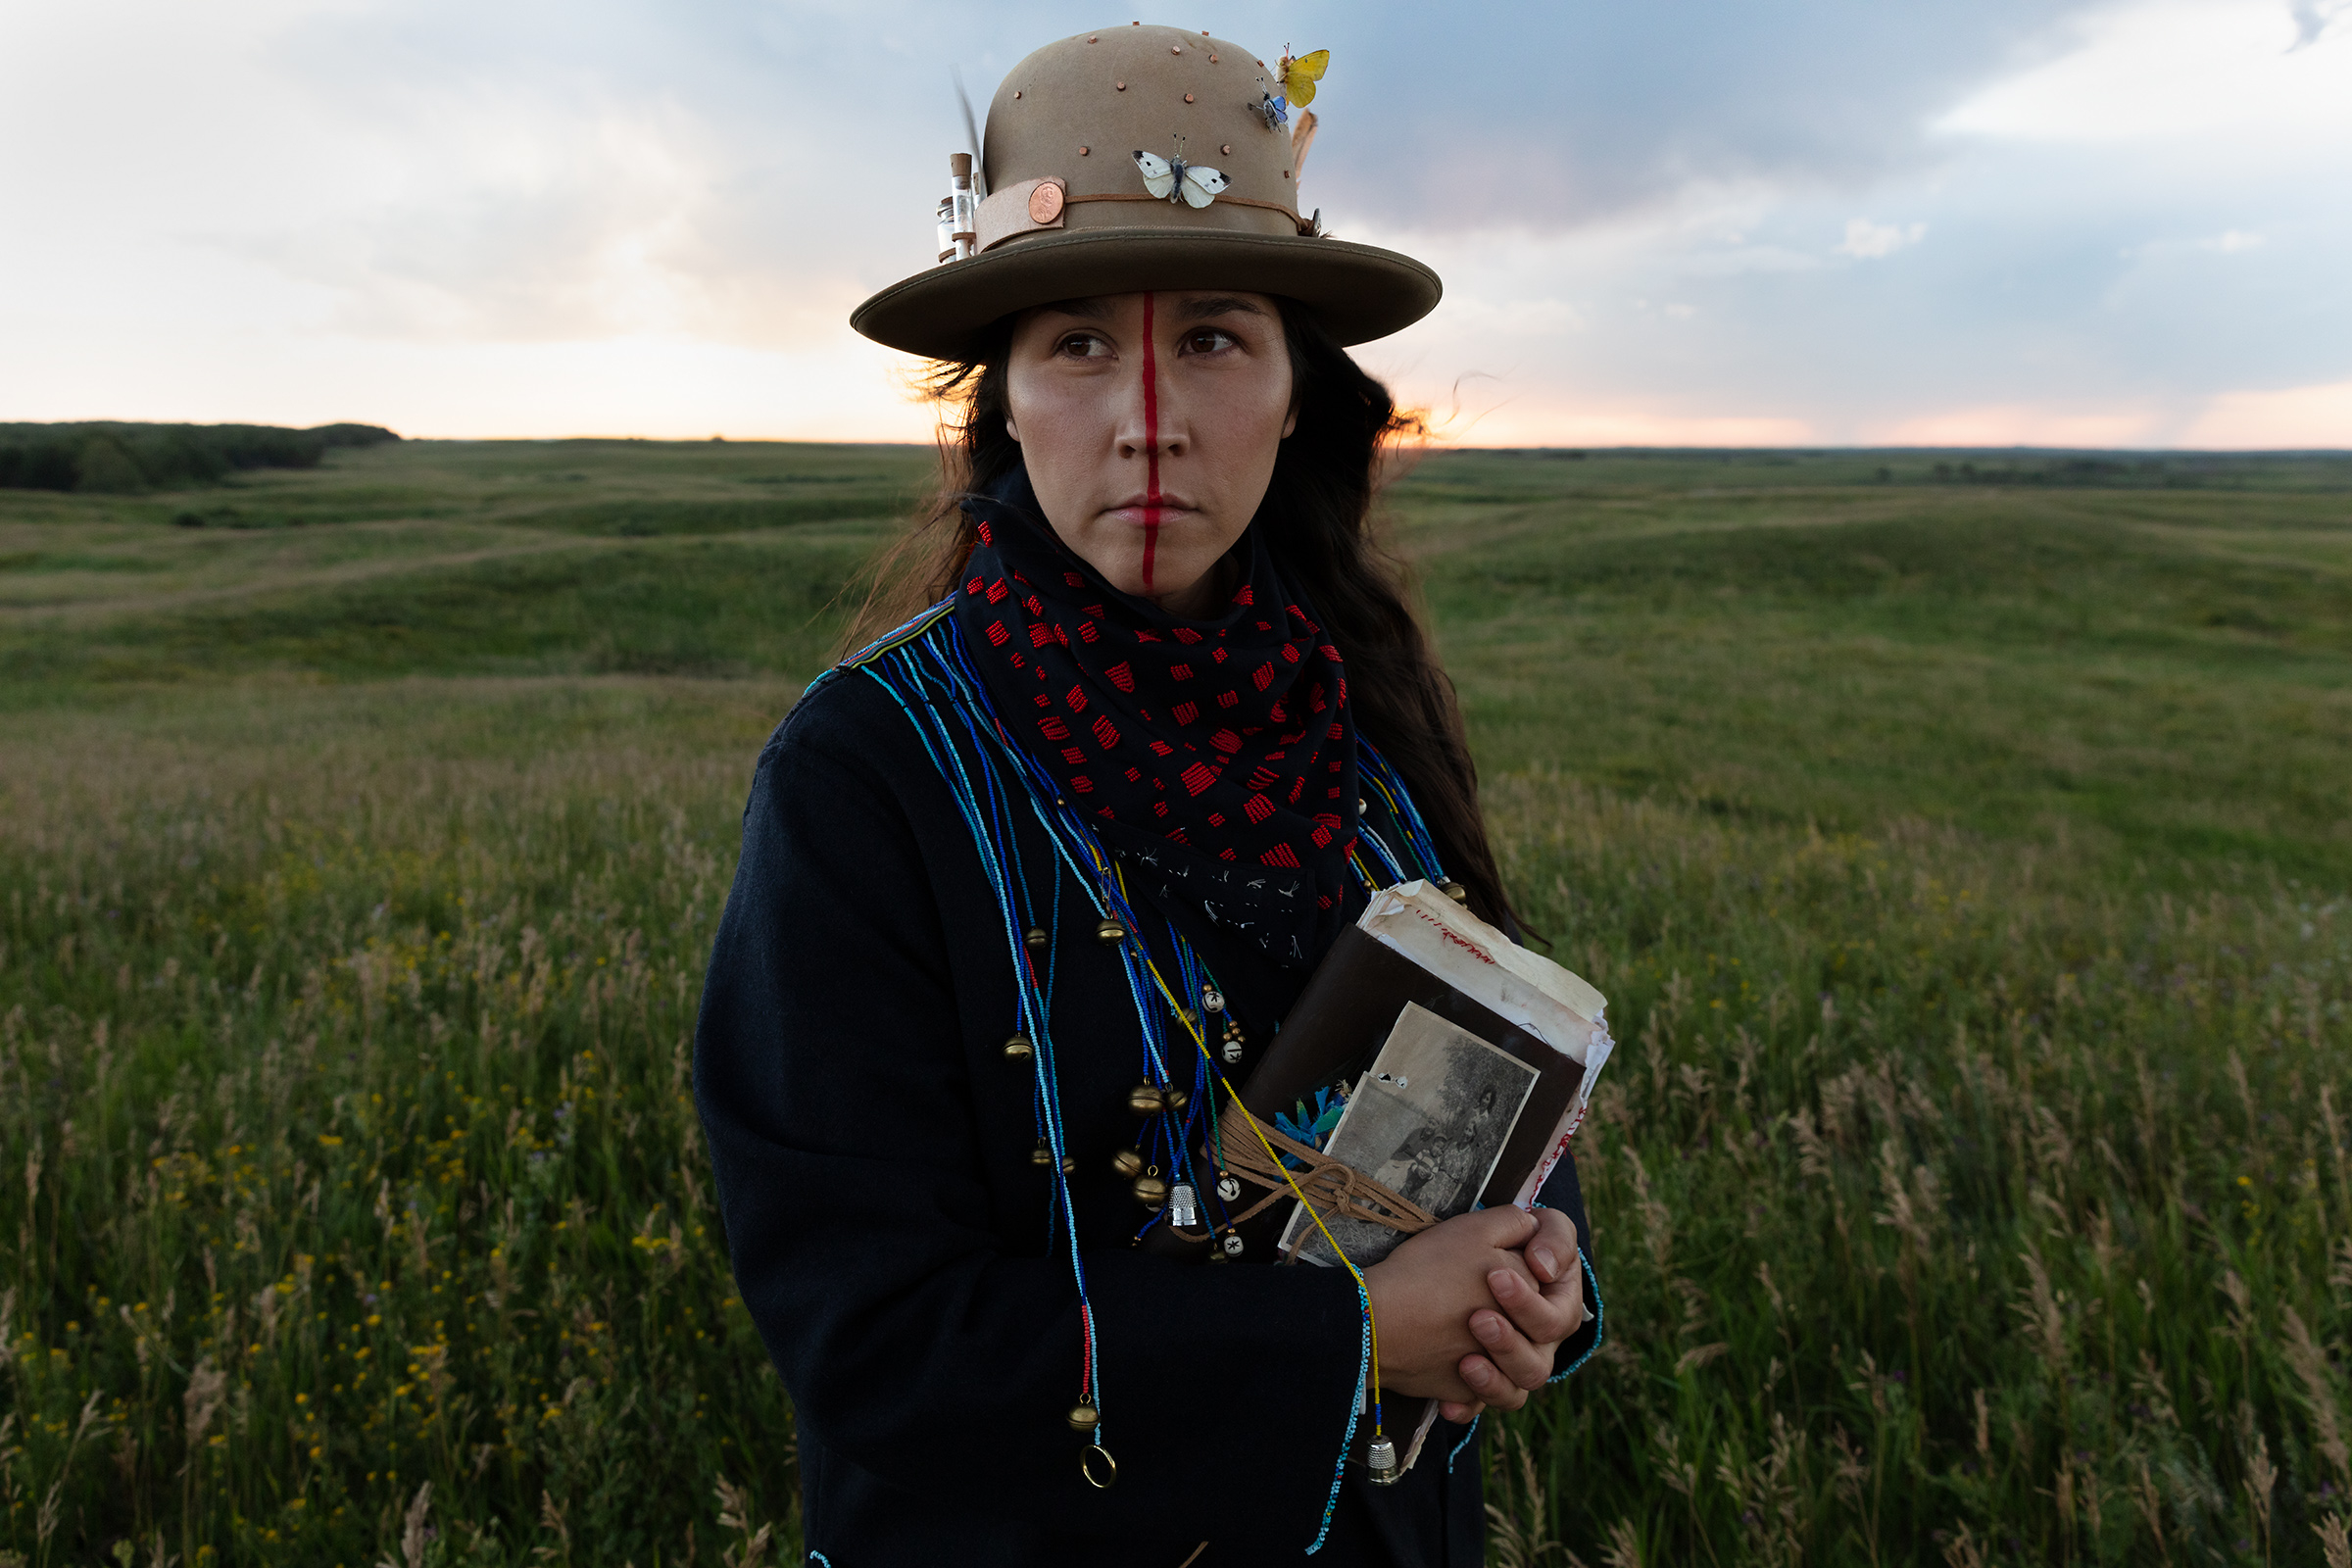     Meryl McMaster, The Grass Grows Deep, 2022, from the series ôhkominak âcimowina / Stories of my Grandmothers. Courtesy of the artist, Stephen Bulger Gallery, and Pierre-François Ouellette art contemporain

